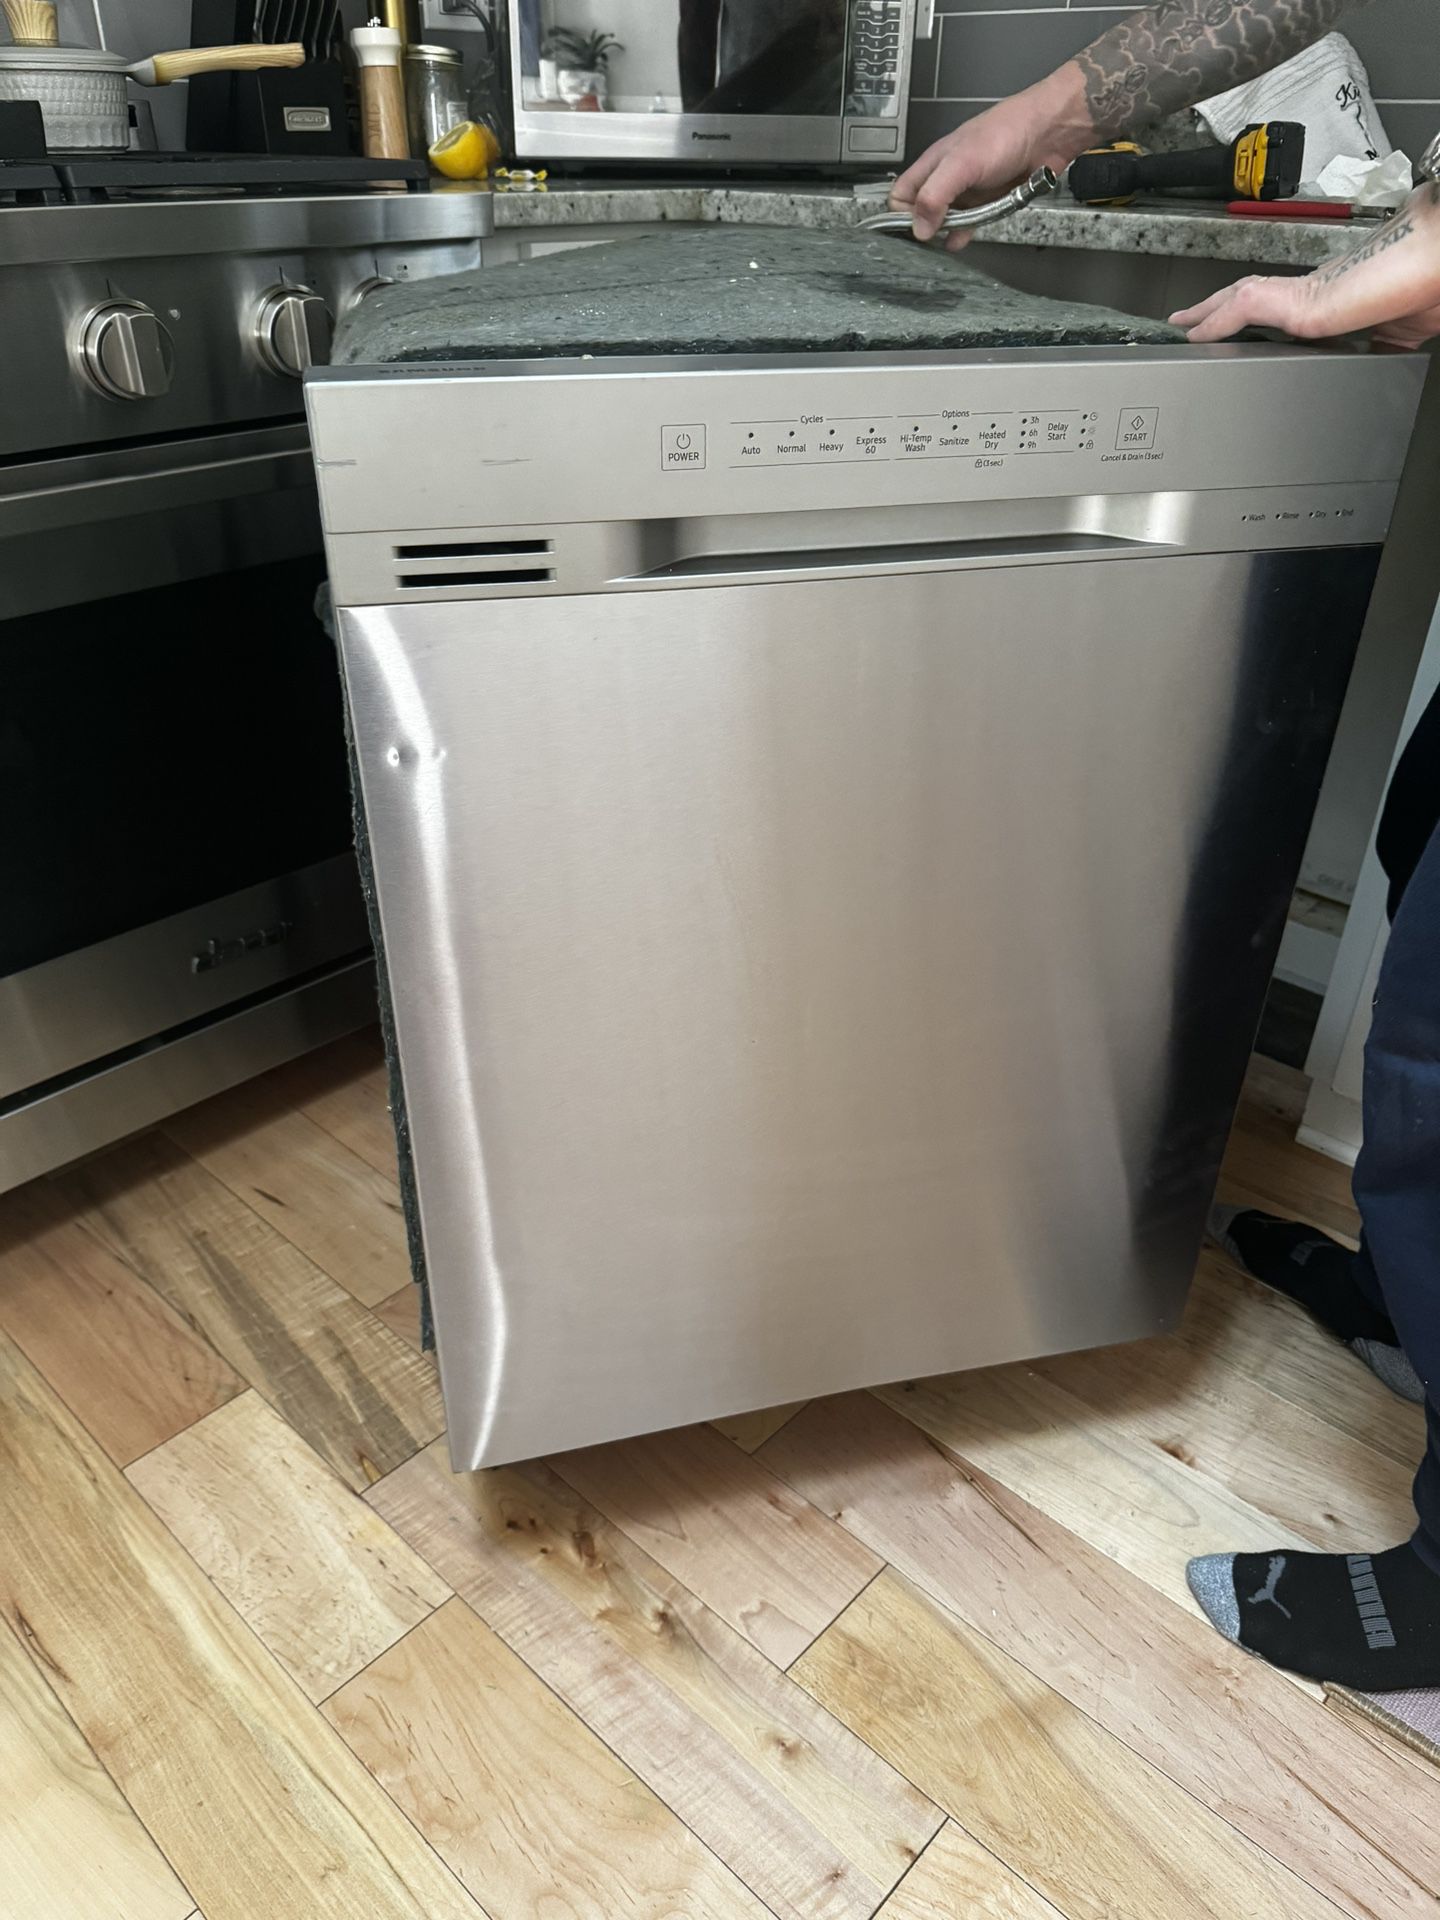 Samsung Dishwasher Brand New Used Once $110 OBO 